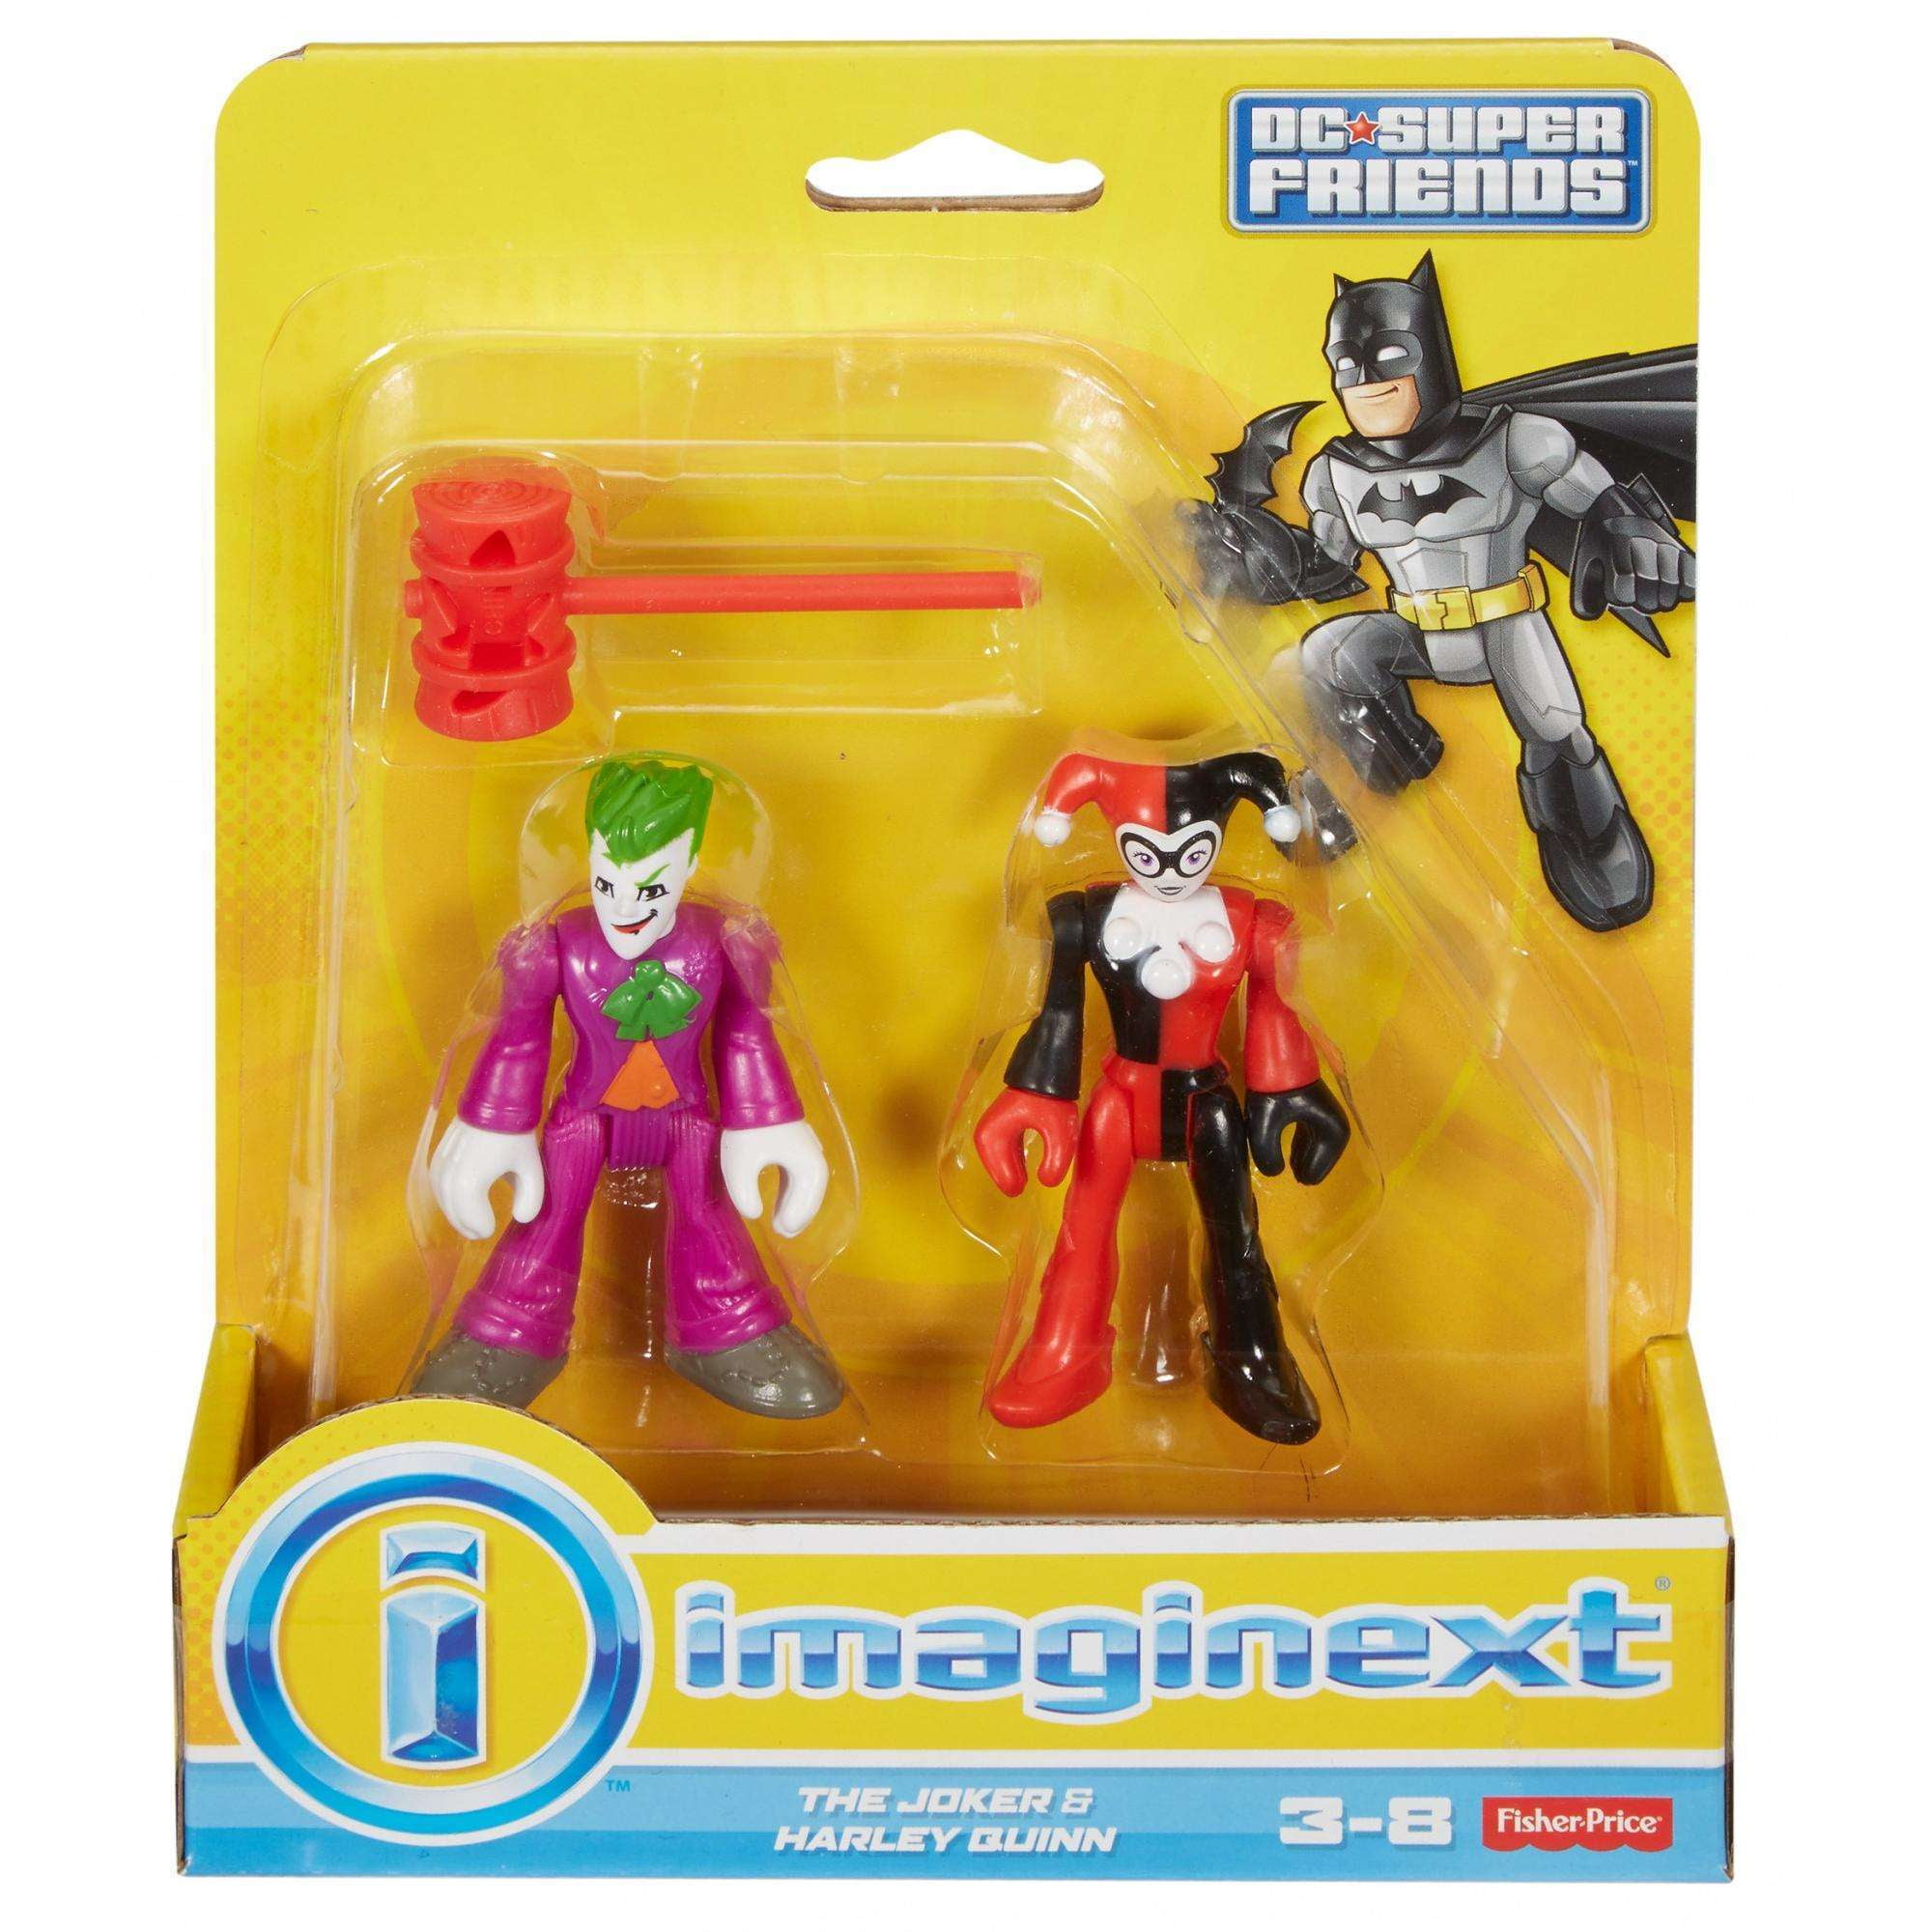 Lot of 2pcs Fisher Price Imaginext DC Super Friends The Joker And Harley Quinnt 